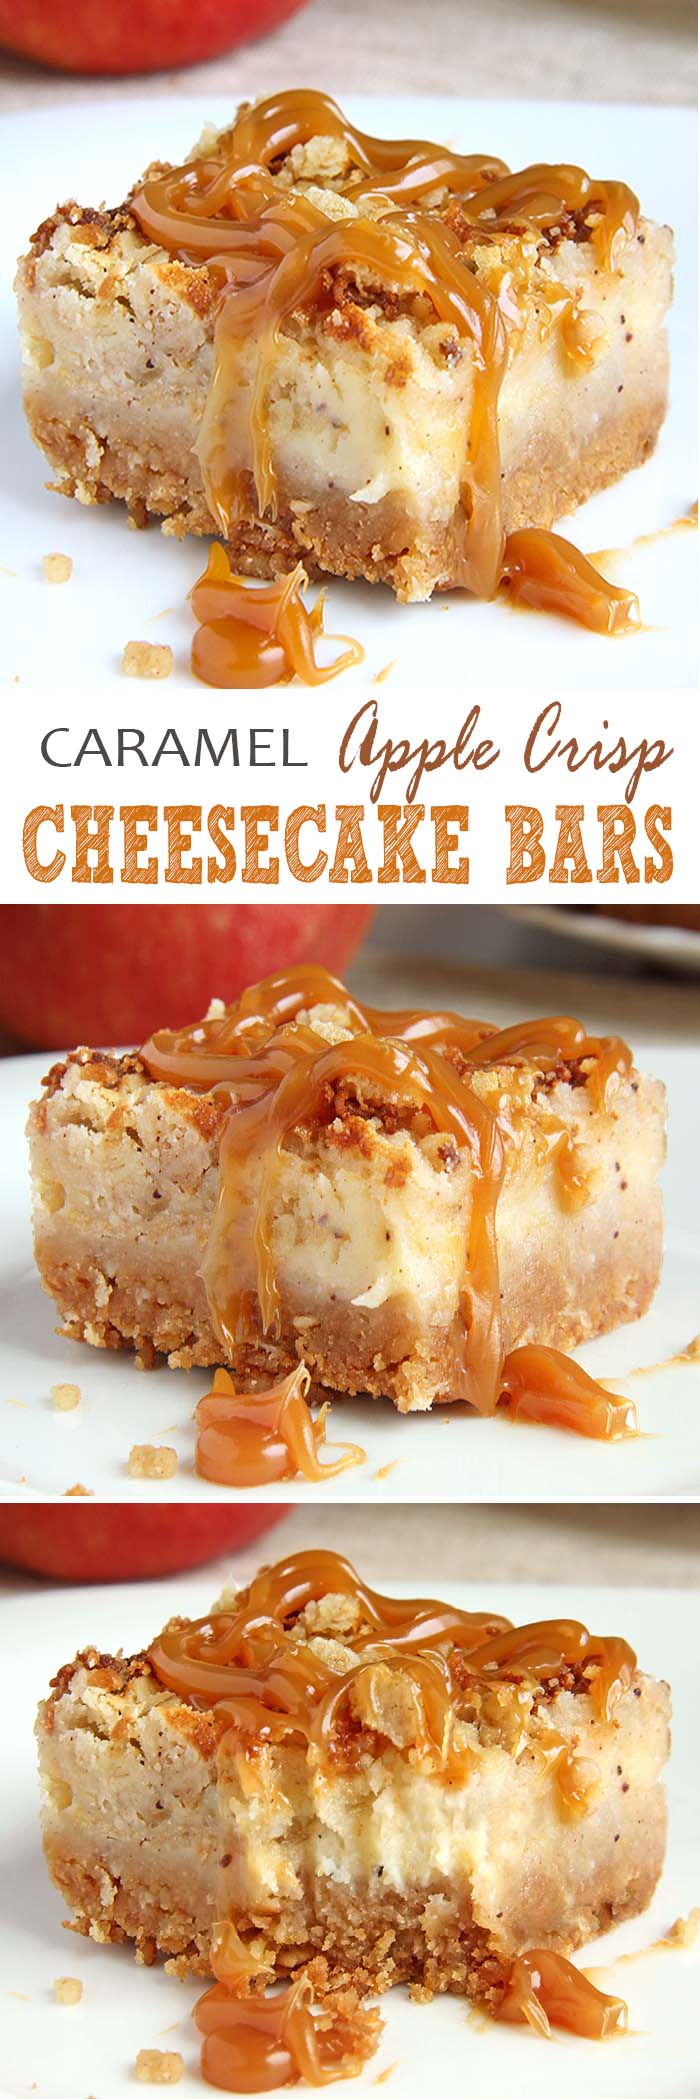 These Caramel Apple Crisp Cheesecake Bars are ideal choice in the autumn season, but also during holidays, which are knocking on the door.